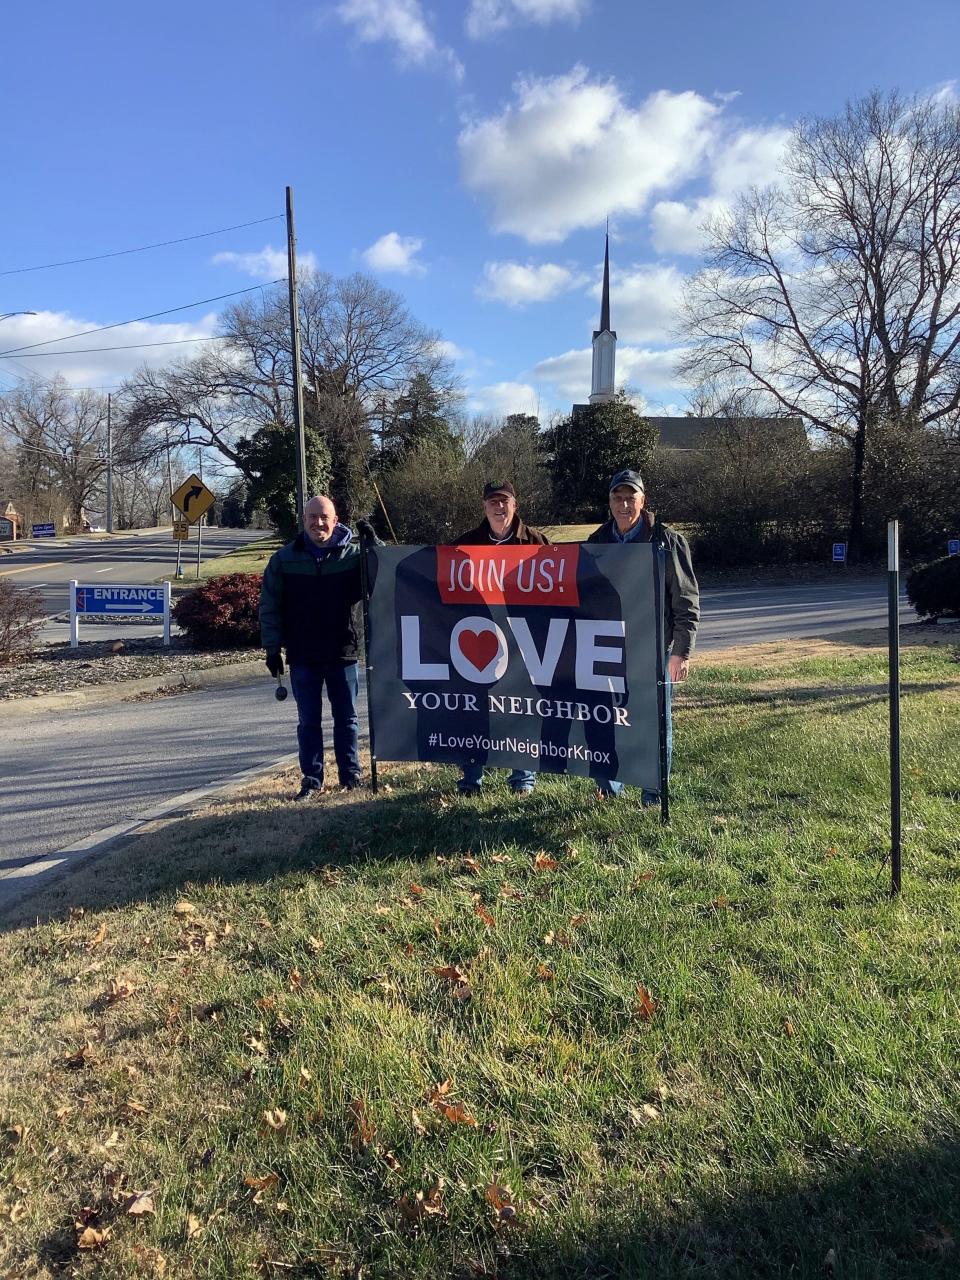 The Rev. Troy Forrester, Dick Hinton, and Joe Benedict, from left, are shown after installing a banner sign in front of First United Methodist Church last year as part of the Love Your Neighbor initiative. The program is designed to encourage houses of worship to push the message of love during this contentious time in American politics and society.